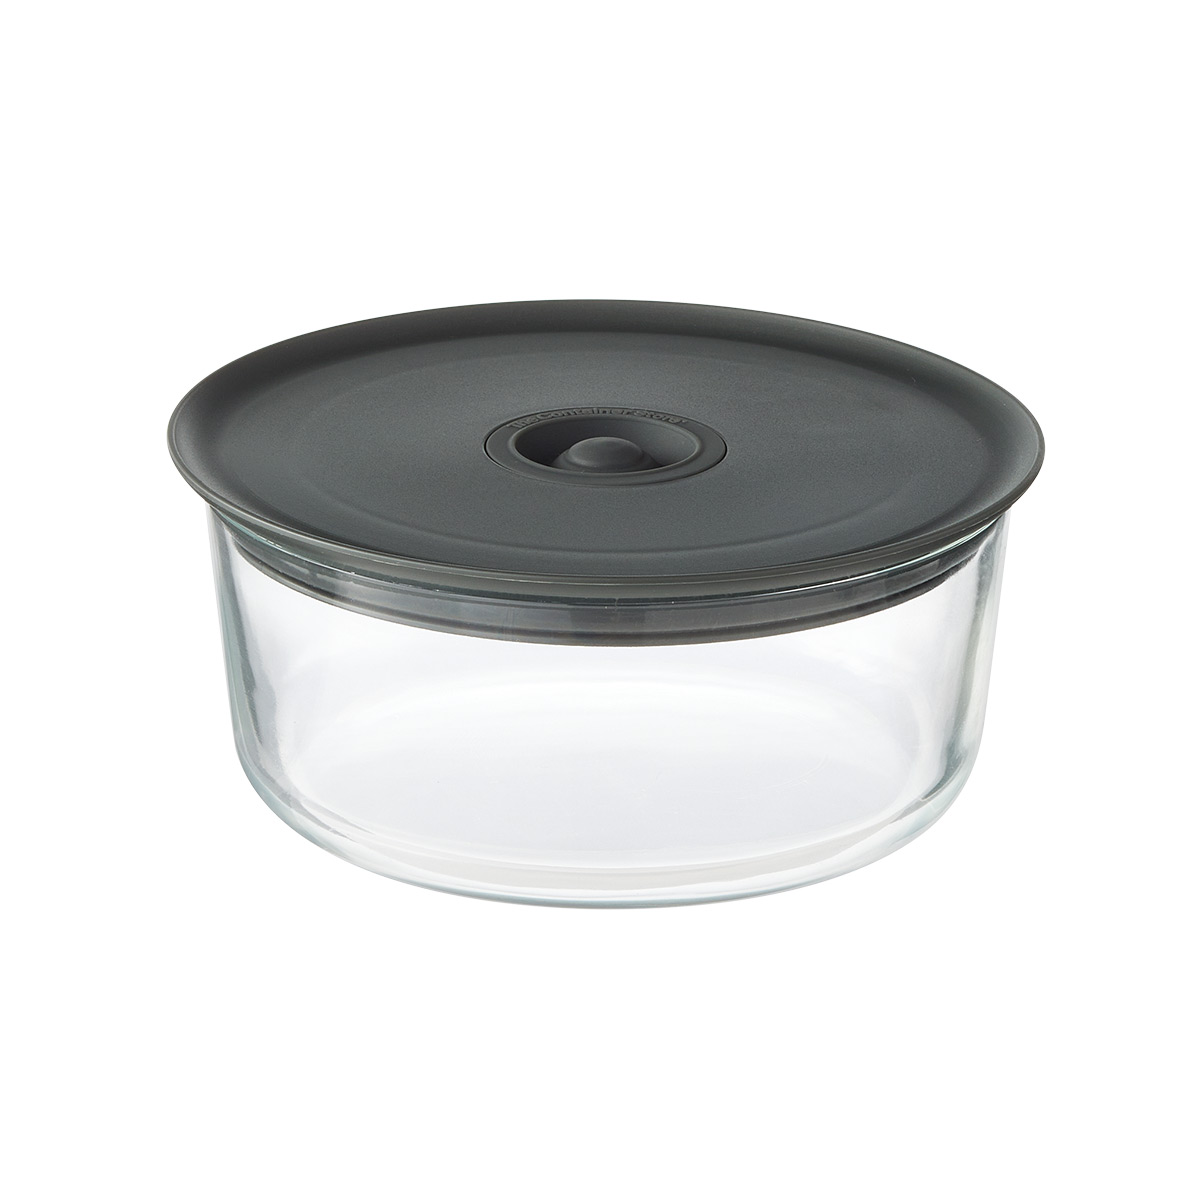 https://www.containerstore.com/catalogimages/449900/10089663_Vent_N_Fresh_Borosilicate_F.jpg